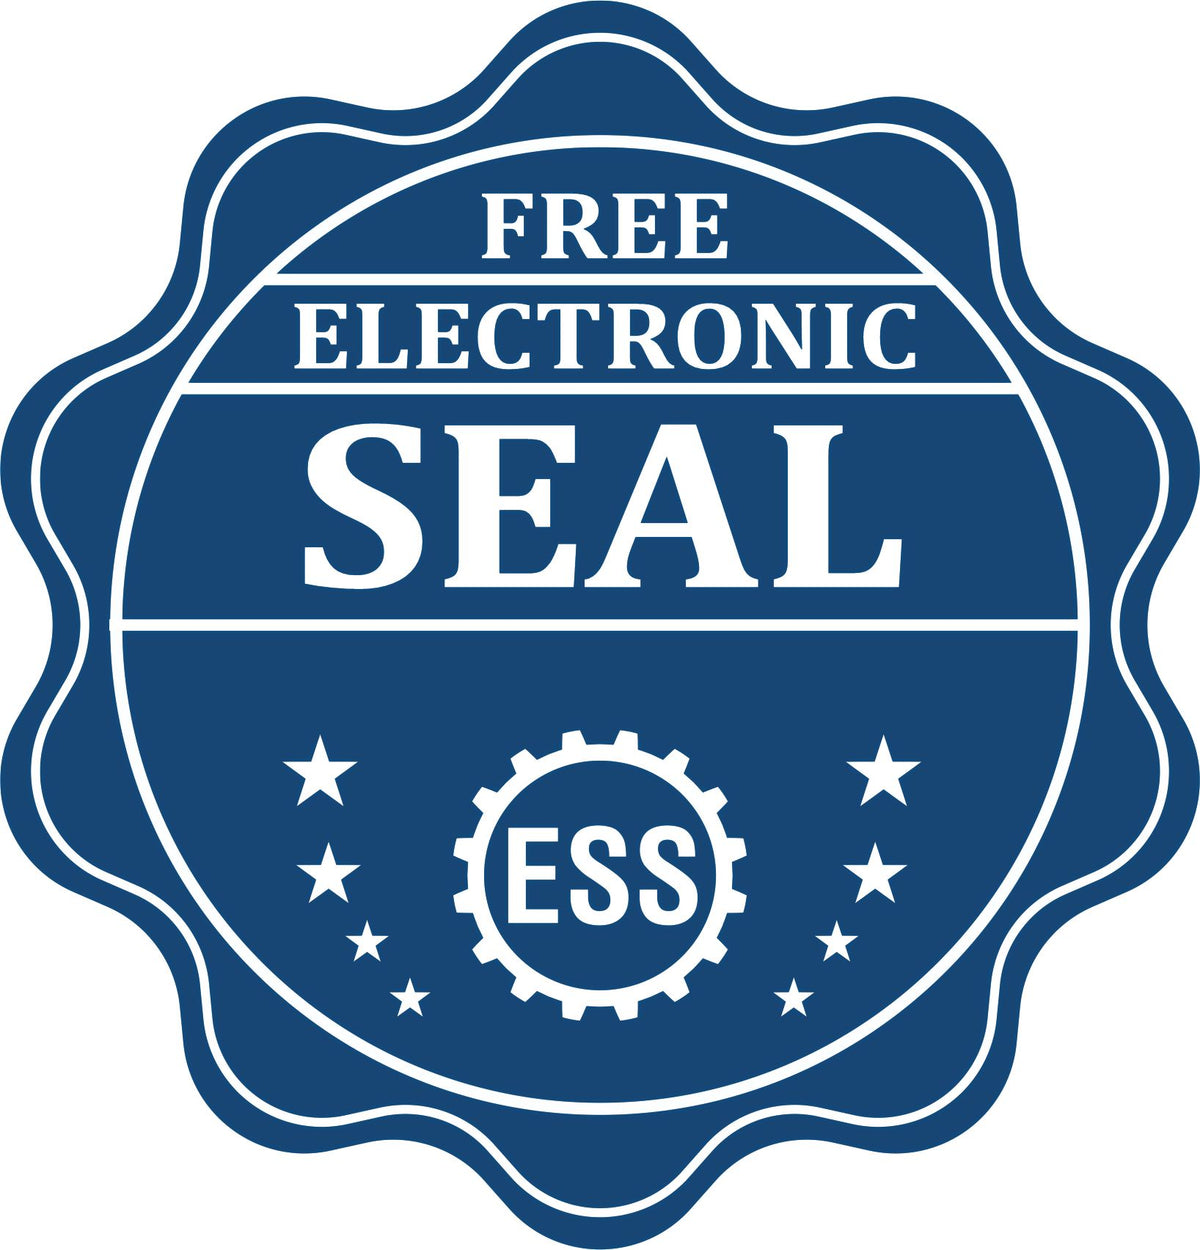 A badge showing a free electronic seal for the Gift Iowa Landscape Architect Seal with stars and the ESS gear on the emblem.